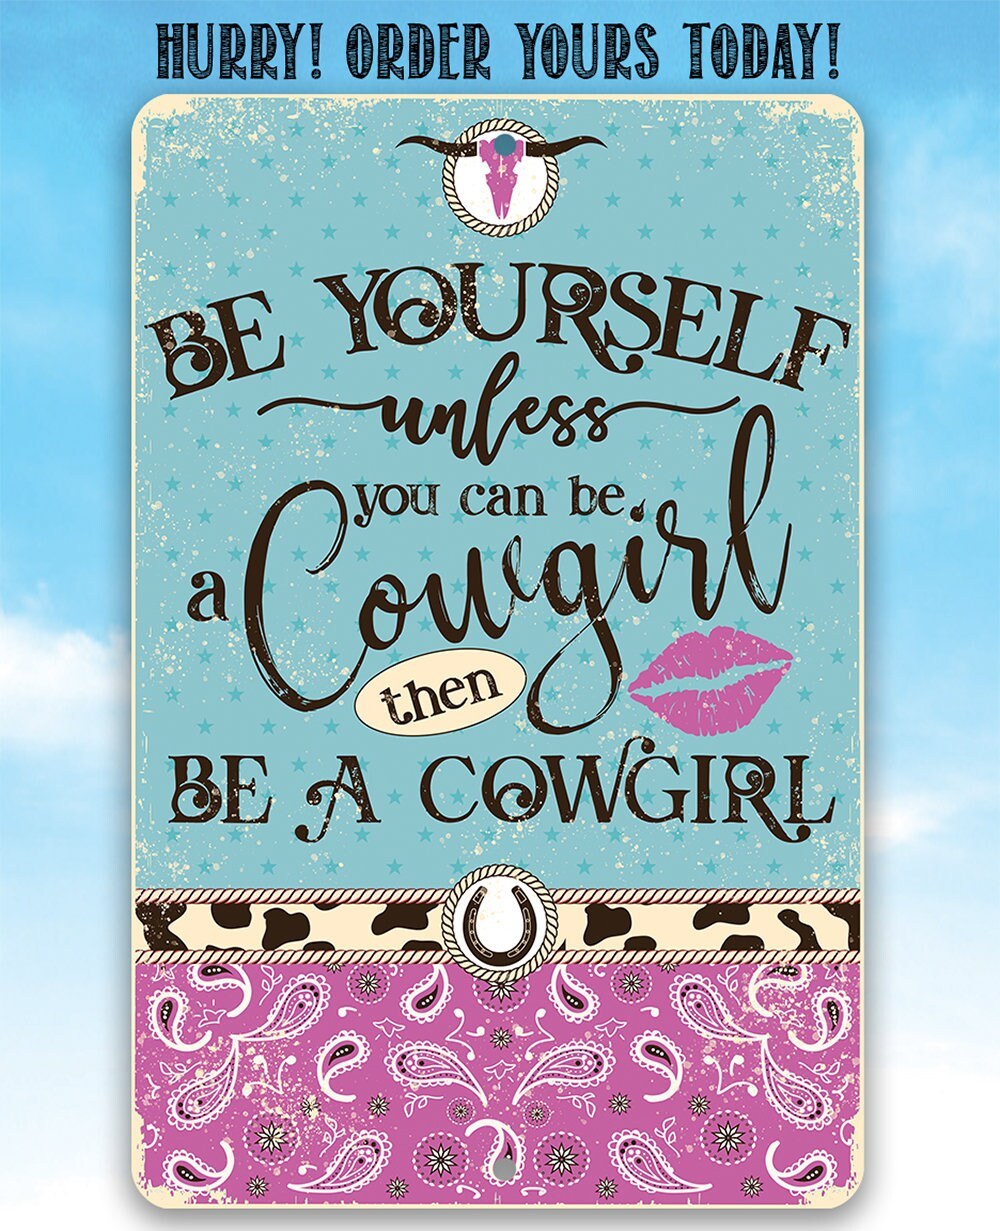 Be Yourself Unless You Can Be A Cowgirl Then Be A Cowgirl - 8" x 12" or 12" x 18" Aluminum Tin Awesome Metal Poster Lone Star Art 